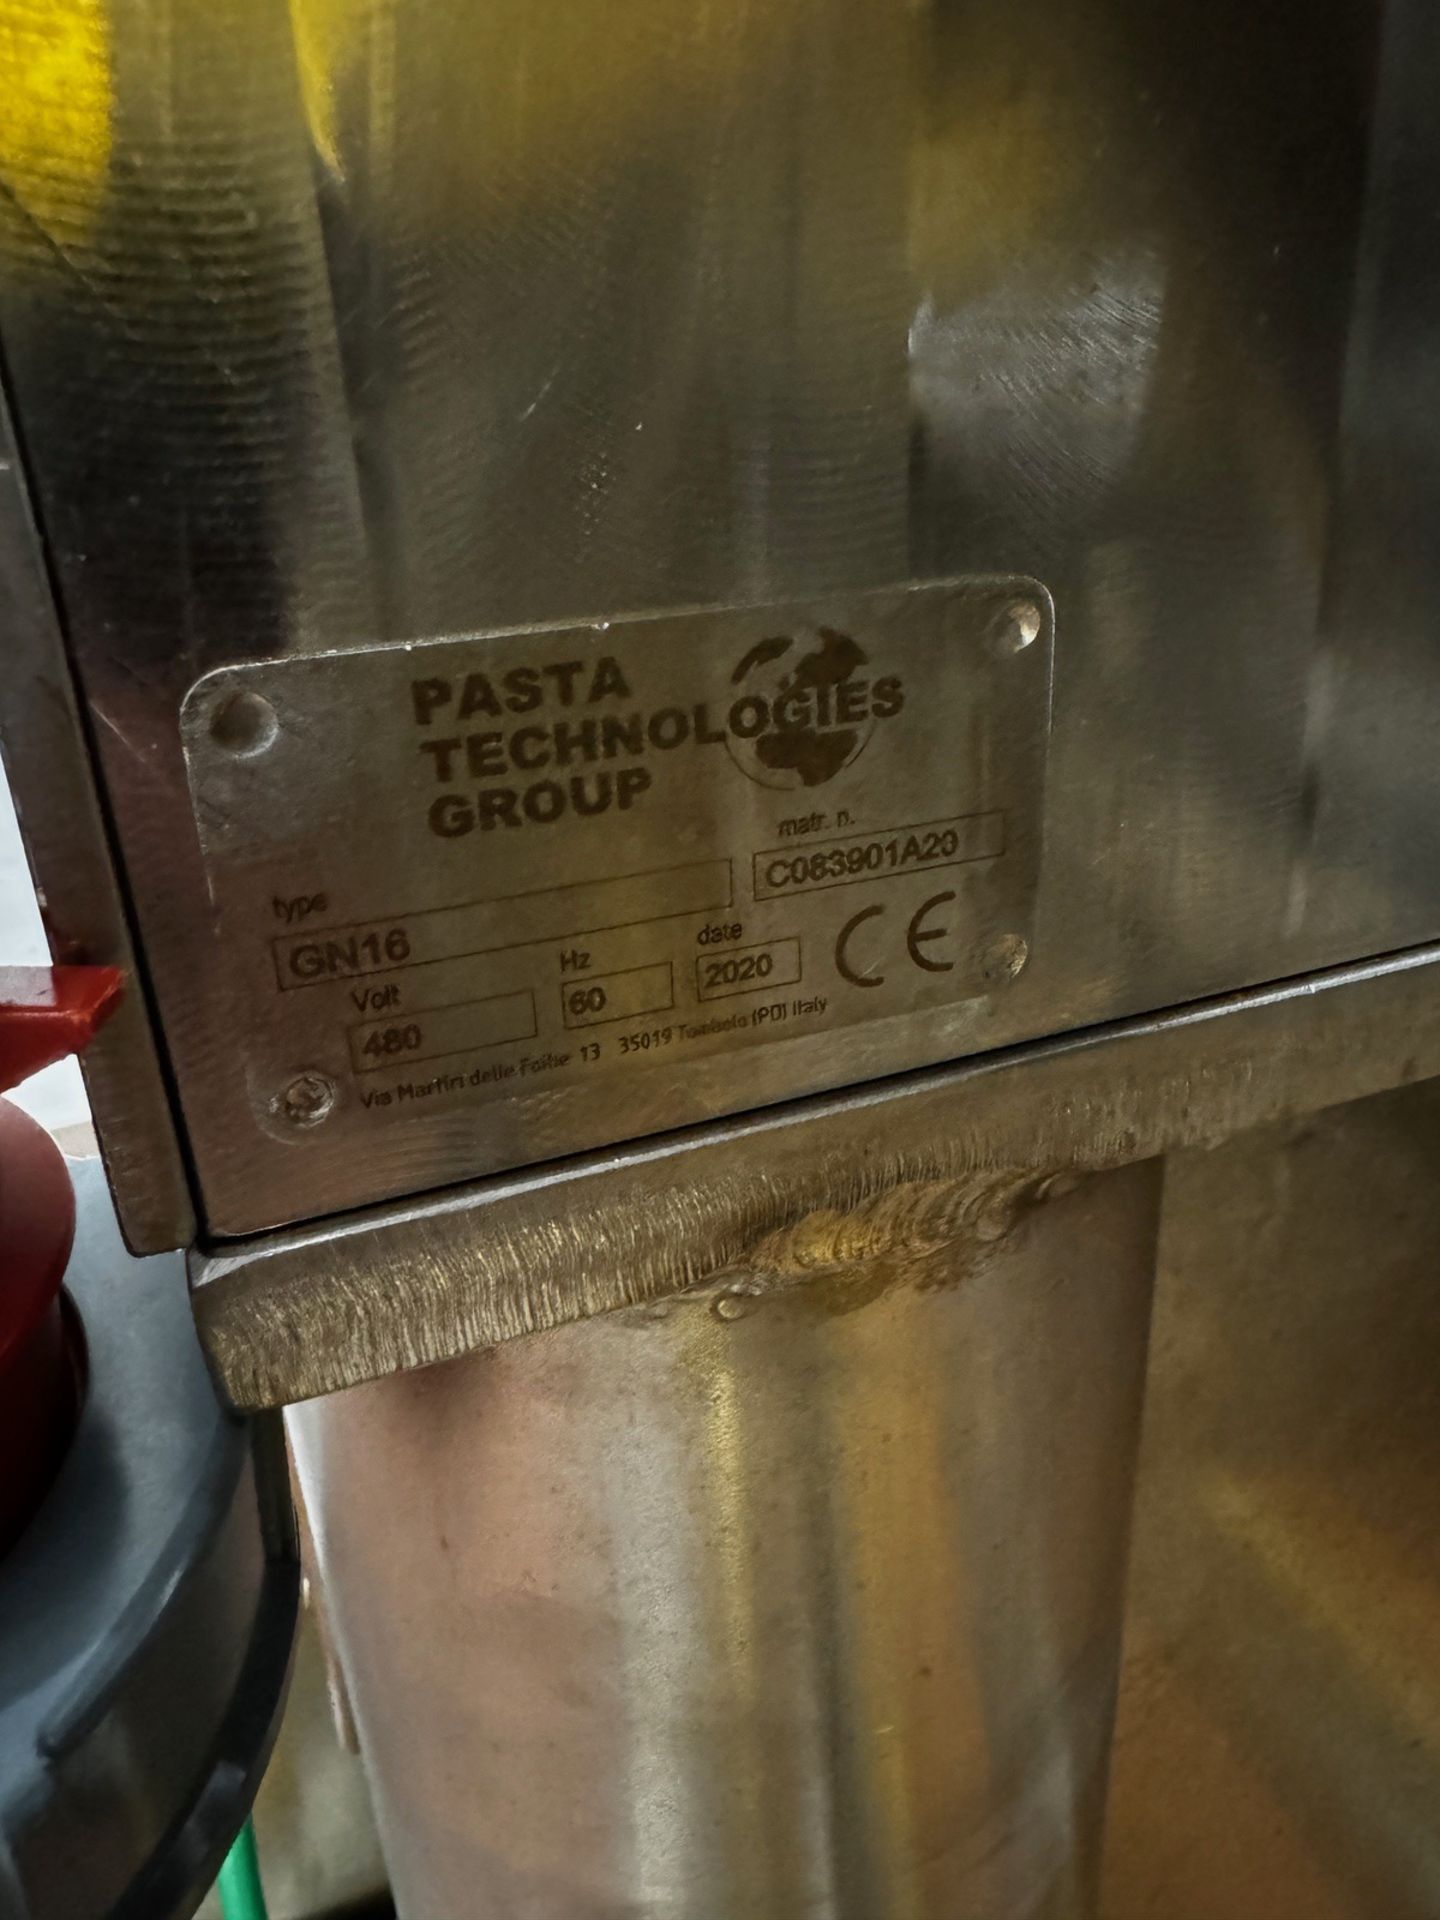 2022 Pasta Technologies GN16 Gnocchi Former & Vibratory Conveyor, S/N C083901A20 - Image 4 of 4